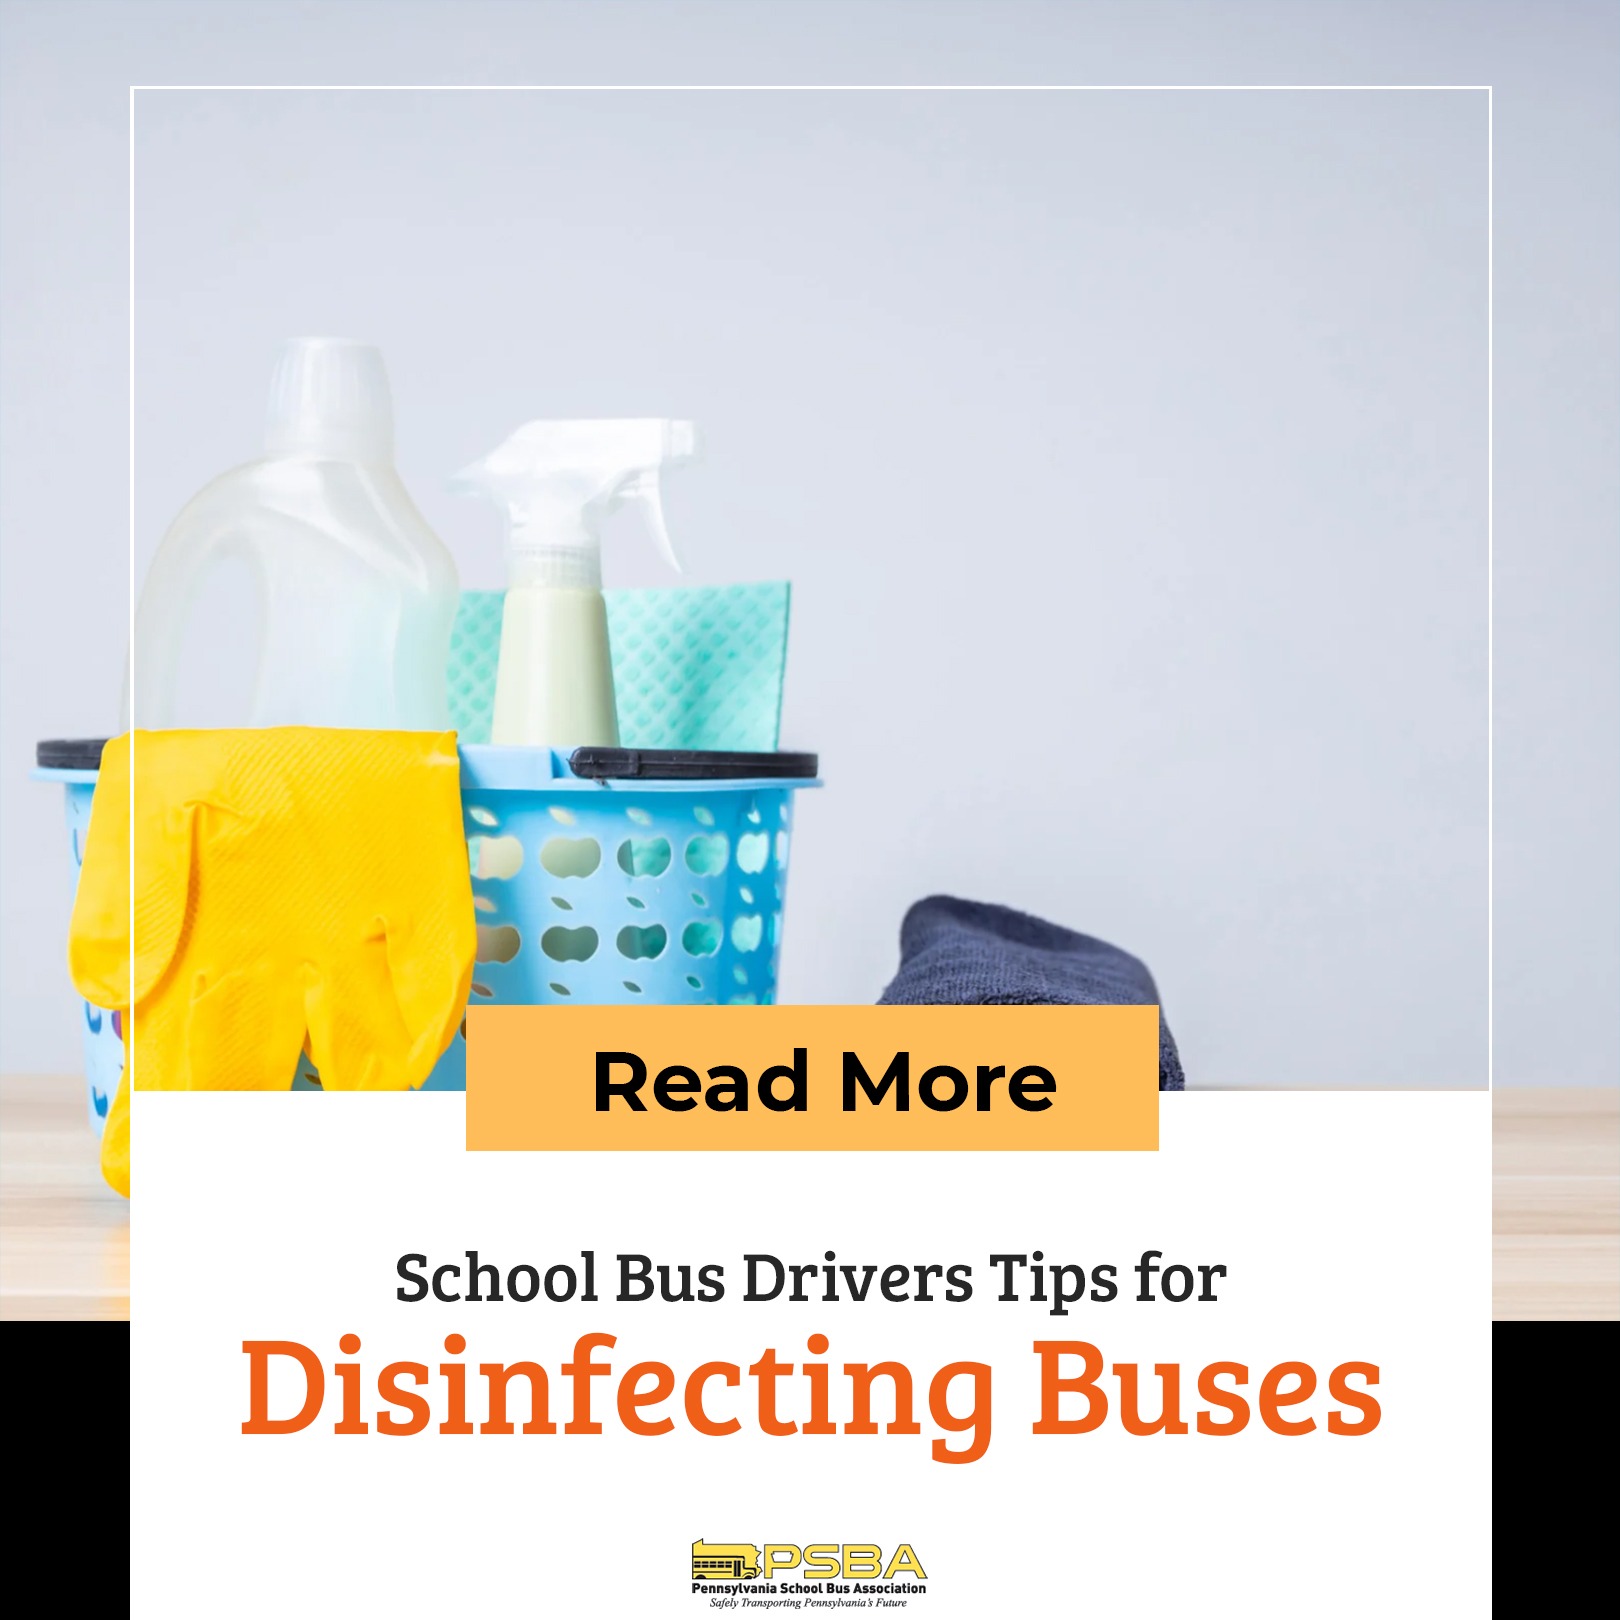 School Bus Drivers Tips for Disinfecting Buses